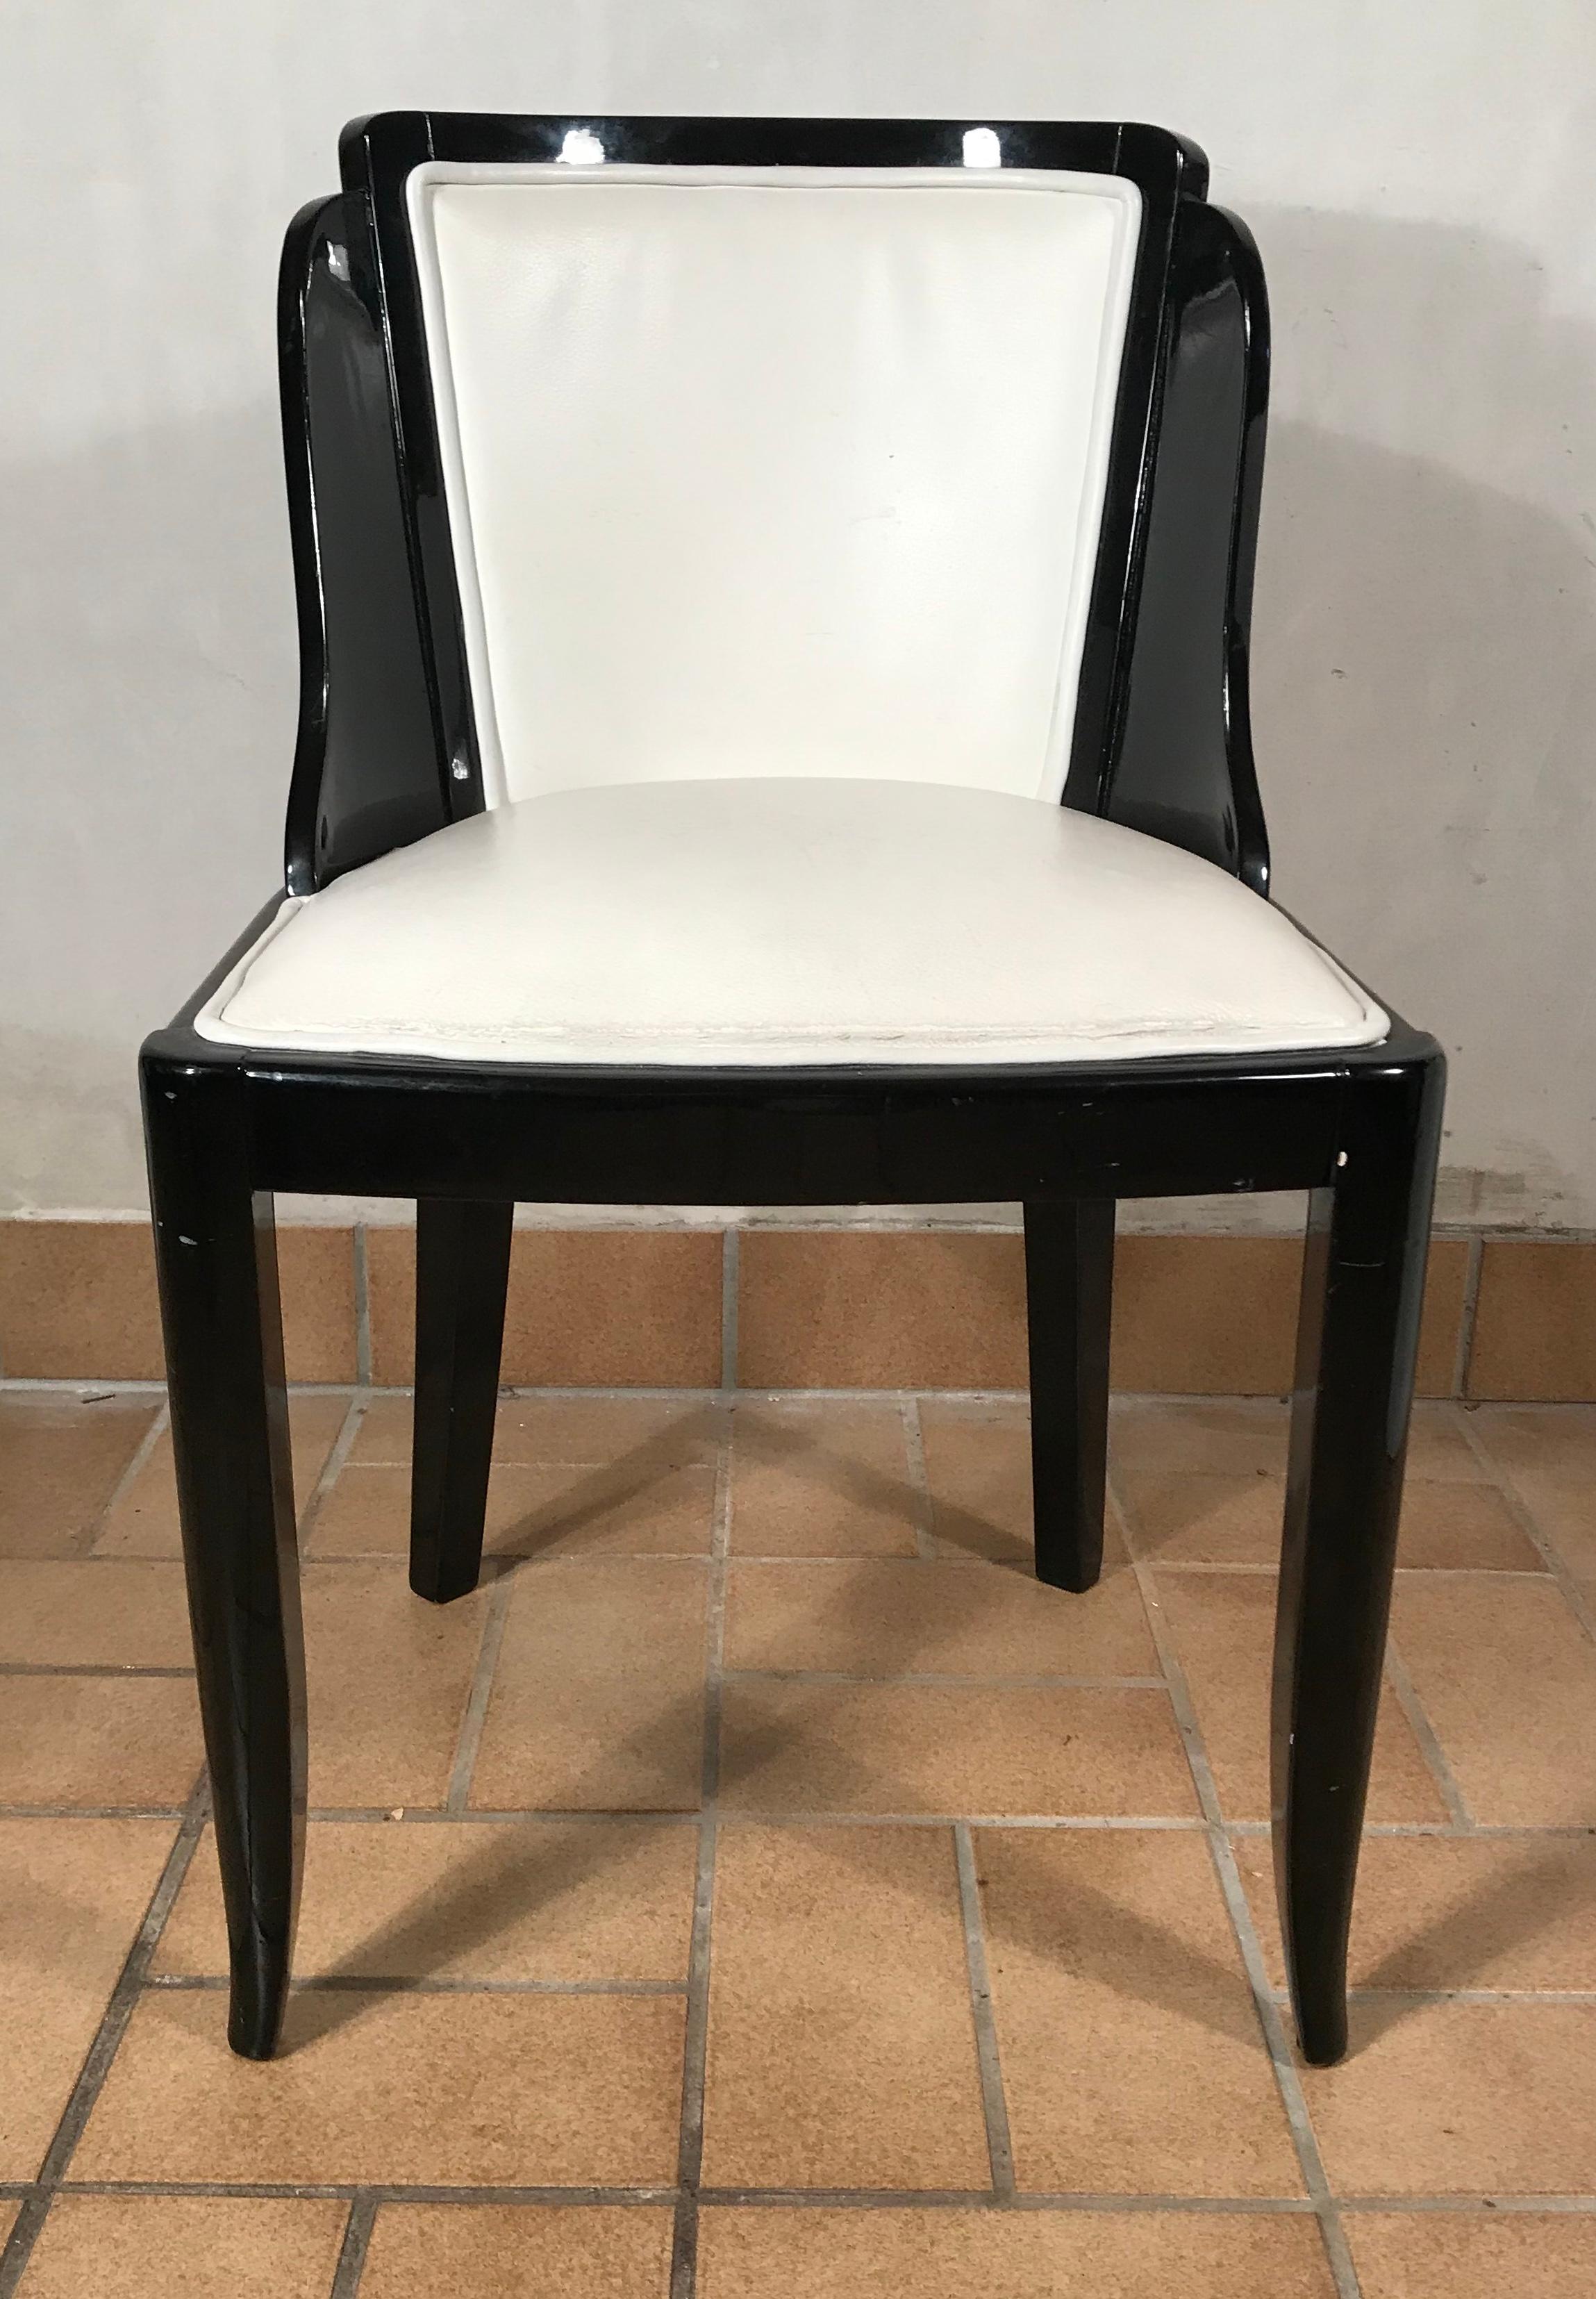 Set of four Art Deco chairs, France, 20th century.
Elegant chairs with black lacquer finish. The chairs are in very good original condition.
The white leather covering is also in good condition.